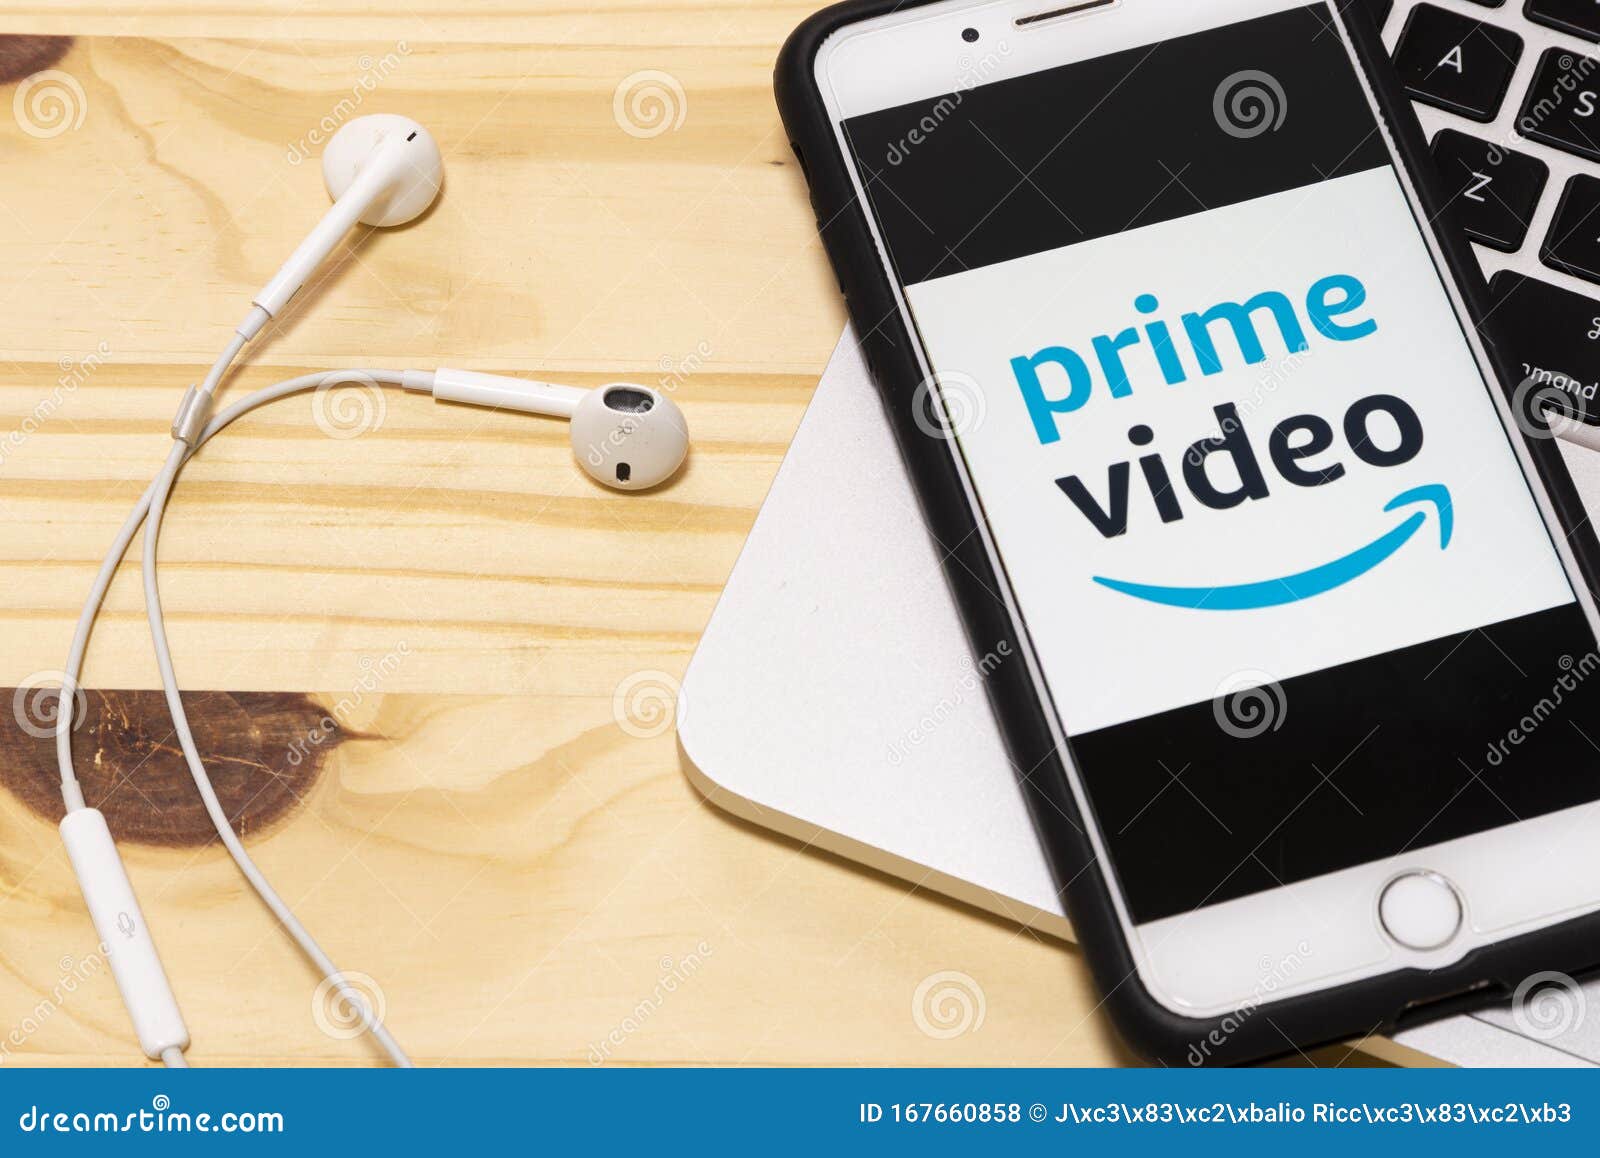 Amazon Prime Video Logo Icon On Smartphone Screen Close Up On Wooden Table Amazon Prime Video Streaming Service Editorial Stock Photo Image Of Logo Network